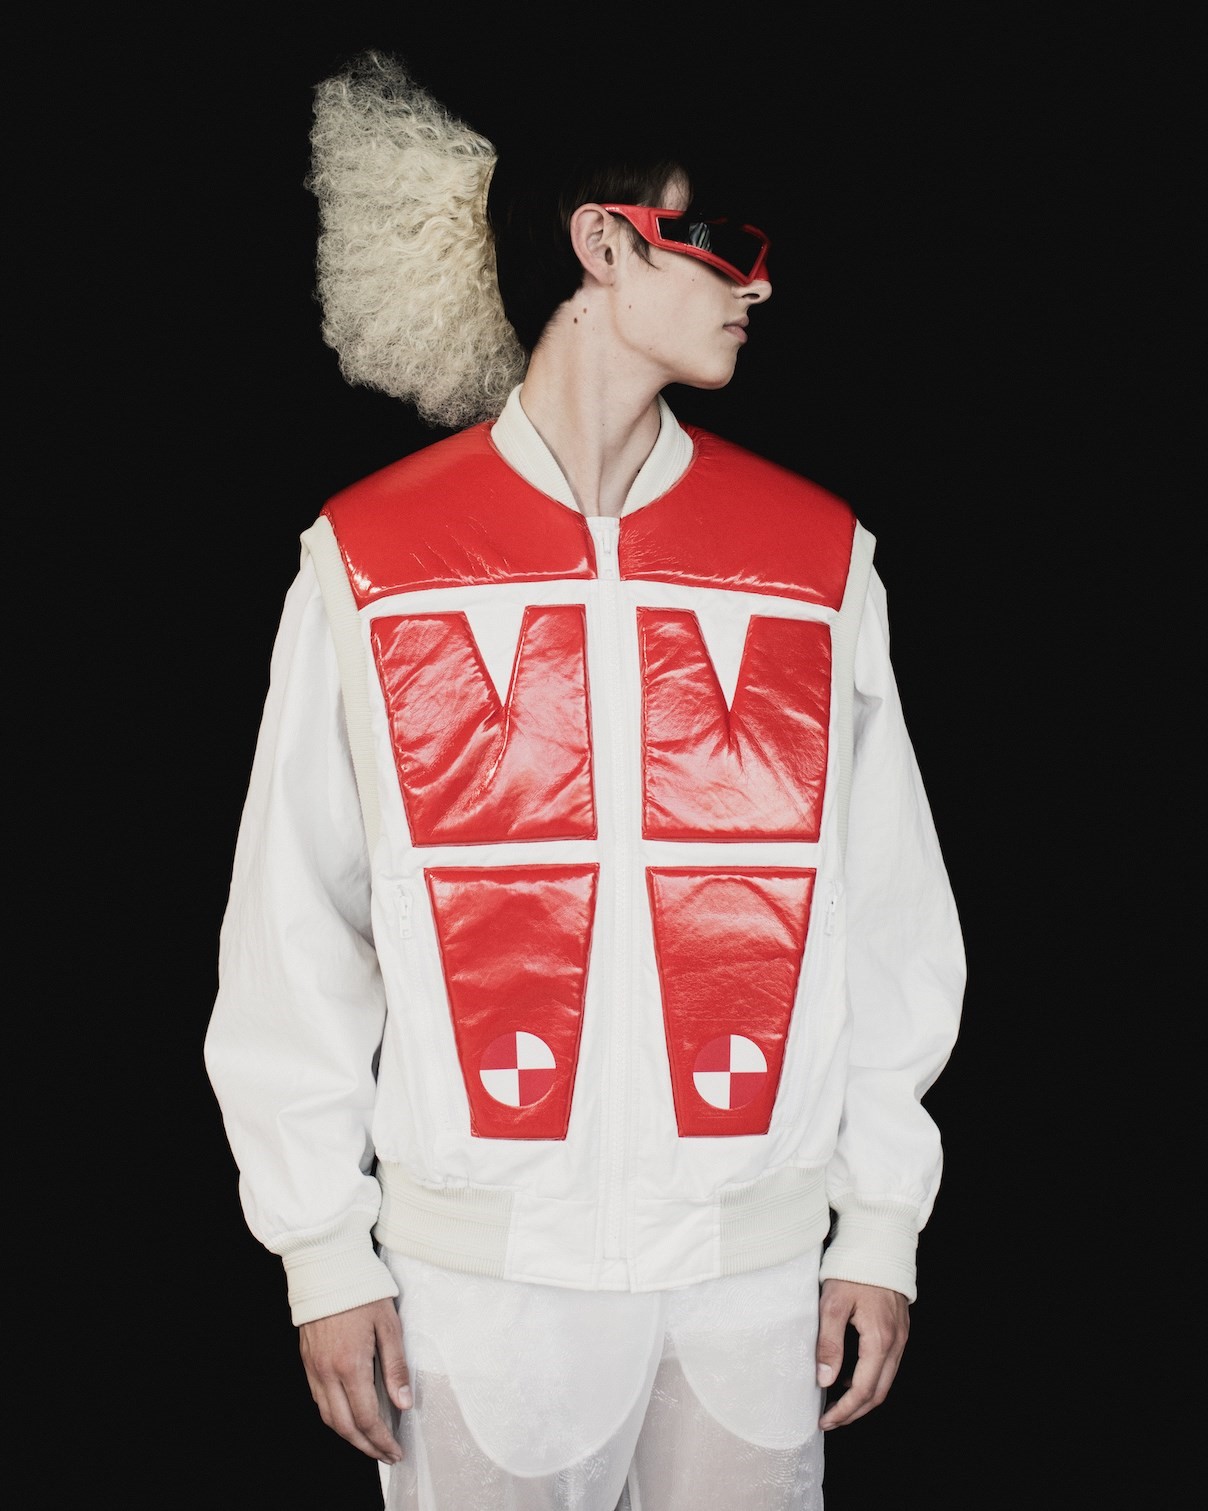 Walter Van Beirendonck on His Radical Label: “I Really Go to the